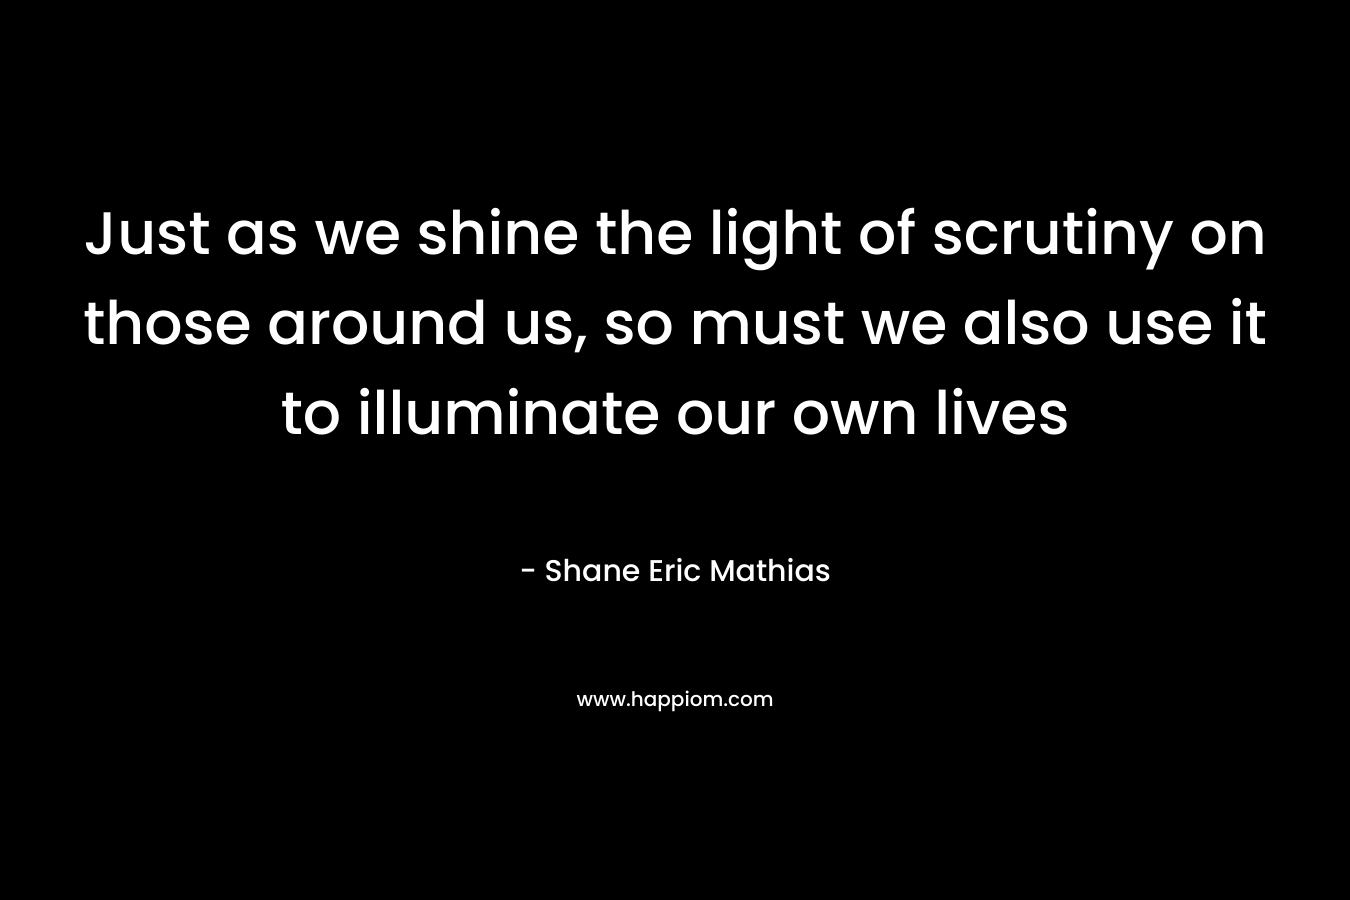 Just as we shine the light of scrutiny on those around us, so must we also use it to illuminate our own lives